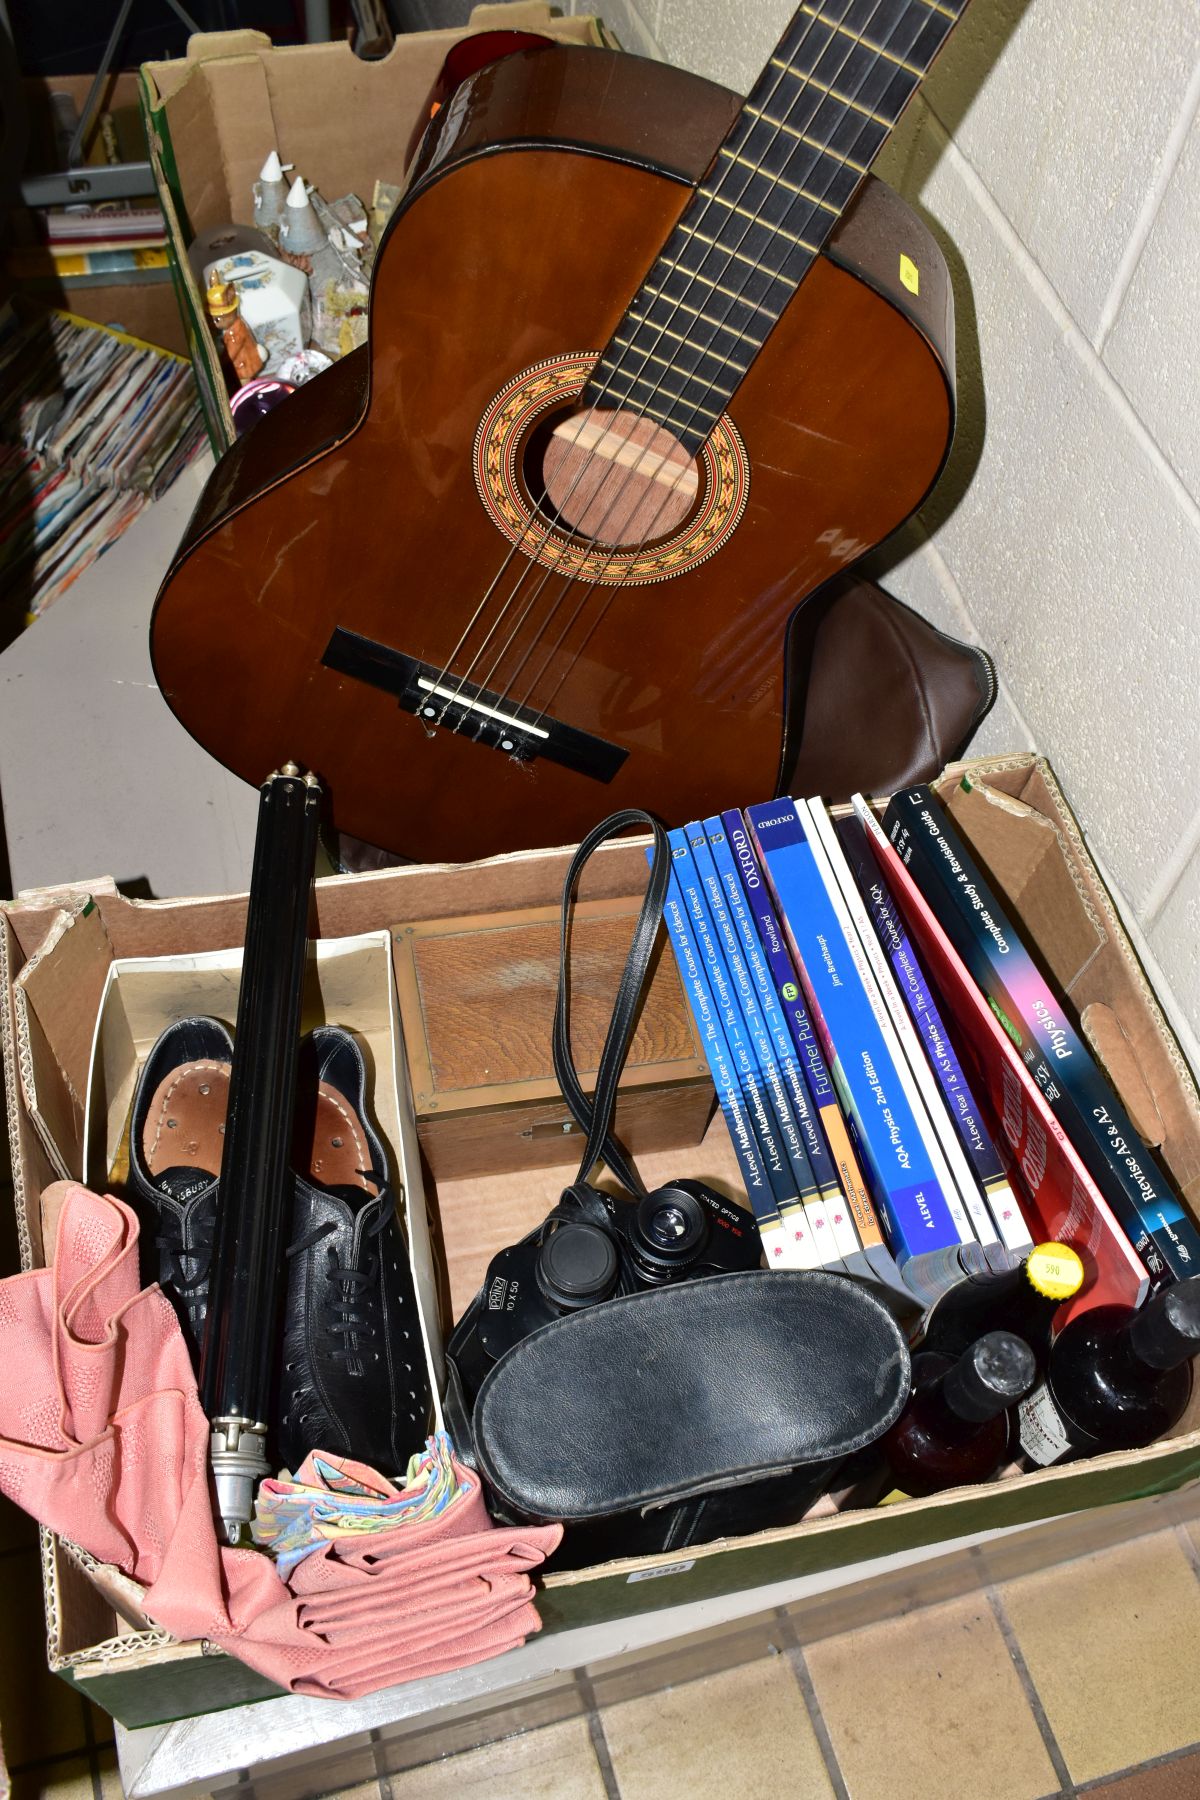 TWO BOXES OF CERAMICS, REVISION GUIDES, BINOCULARS, ETC, AND AN ACOUSTIC GUITAR, the guitar